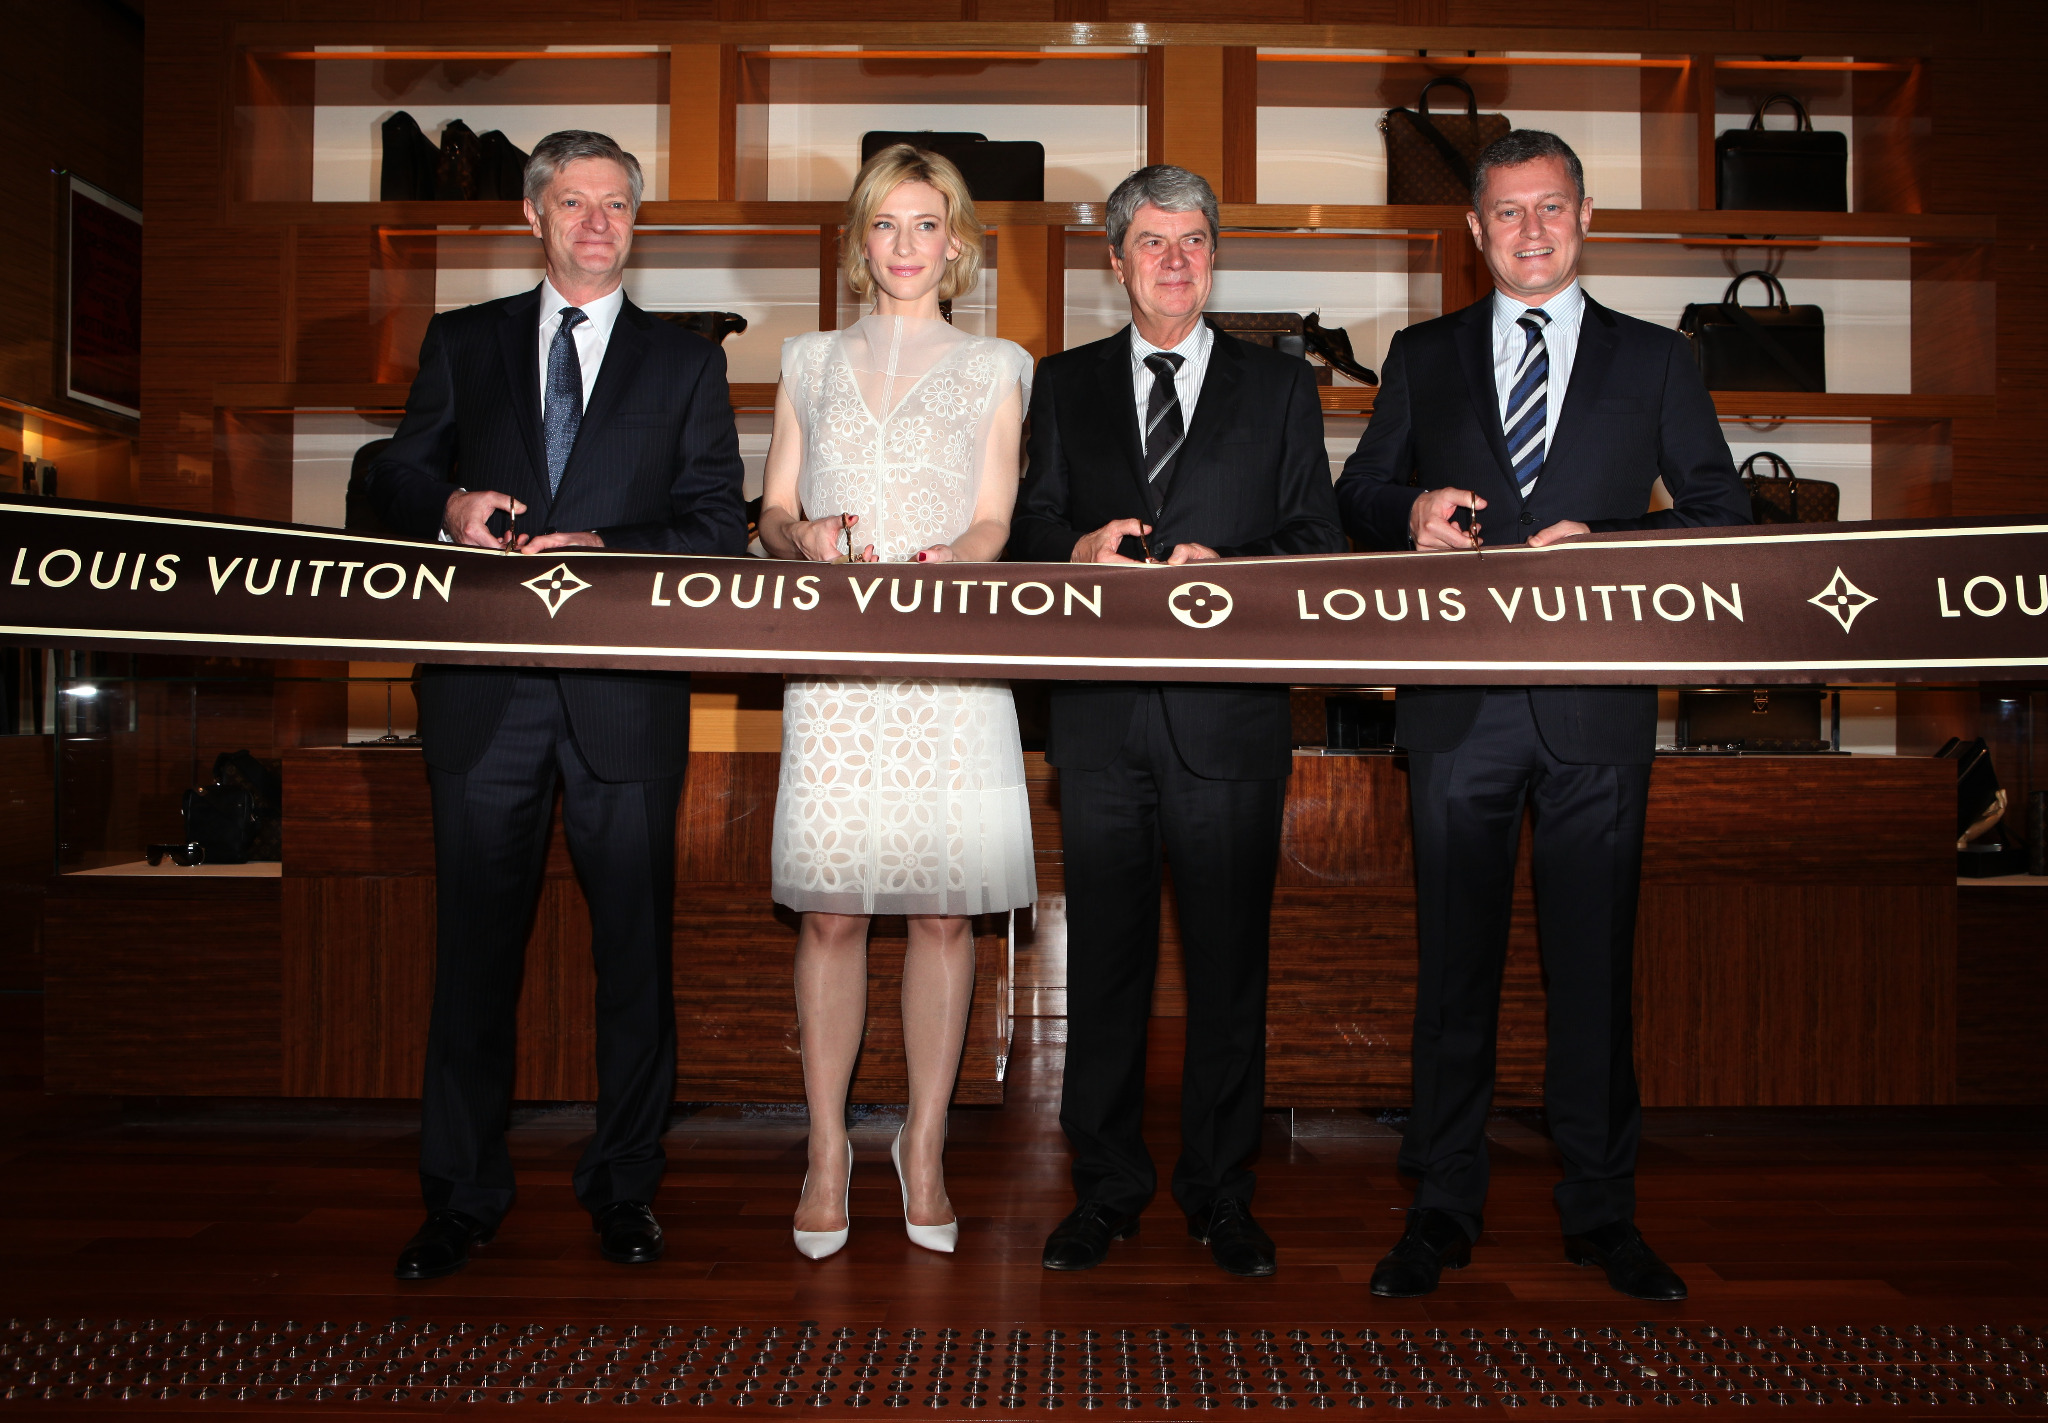 Lv Australia : Louis Vuitton Has Opened A New Store In Sydney